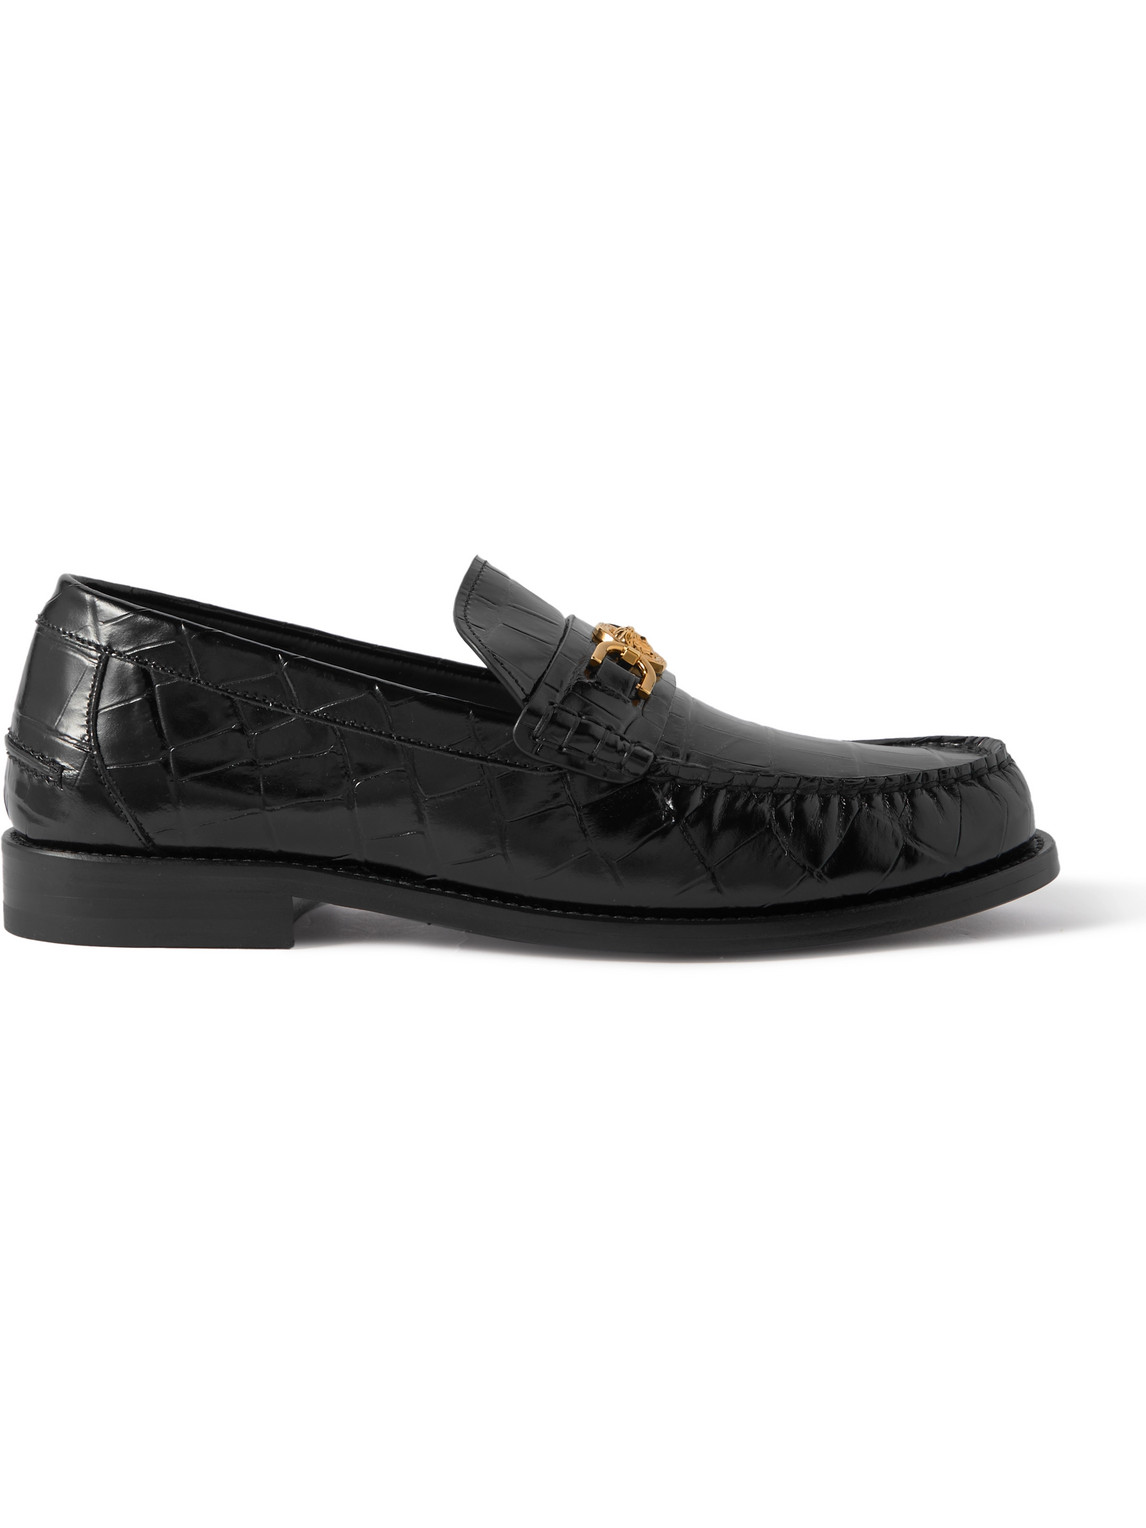 Horsebit-Embellished Croc-Effect Patent-Leather Loafers